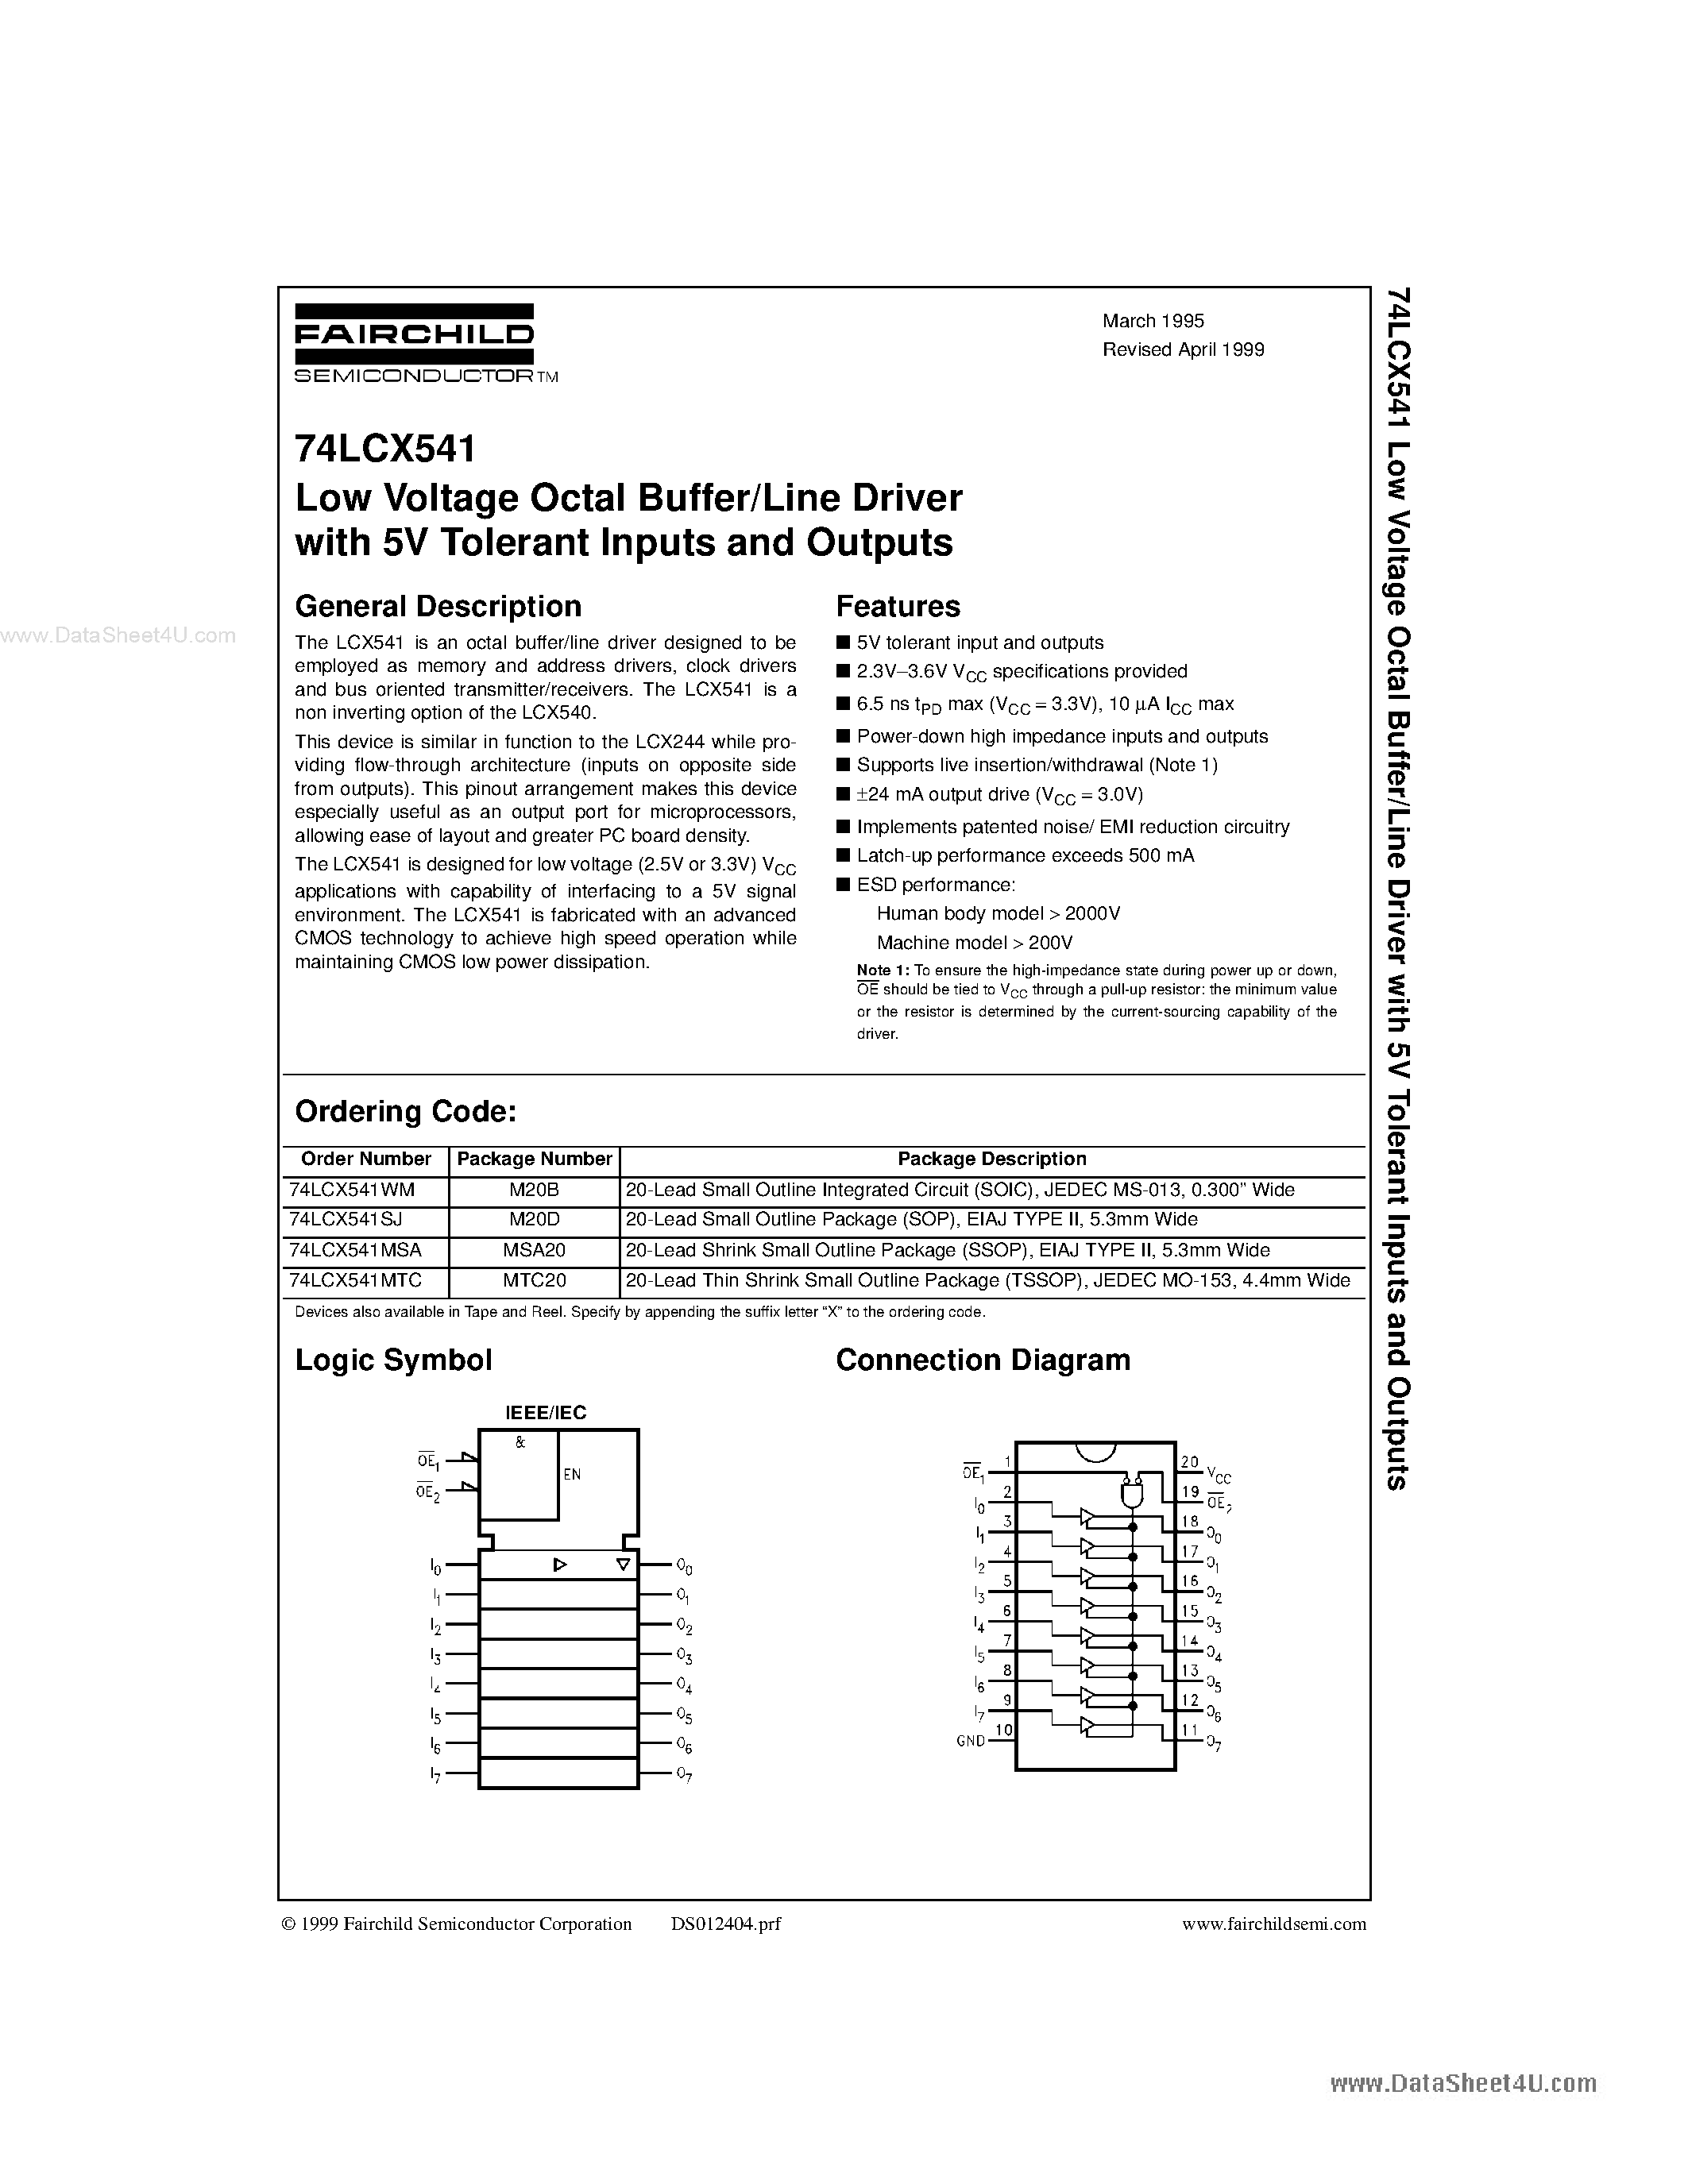 Datasheet LCX541 - Search -----> 74LCX541 page 1